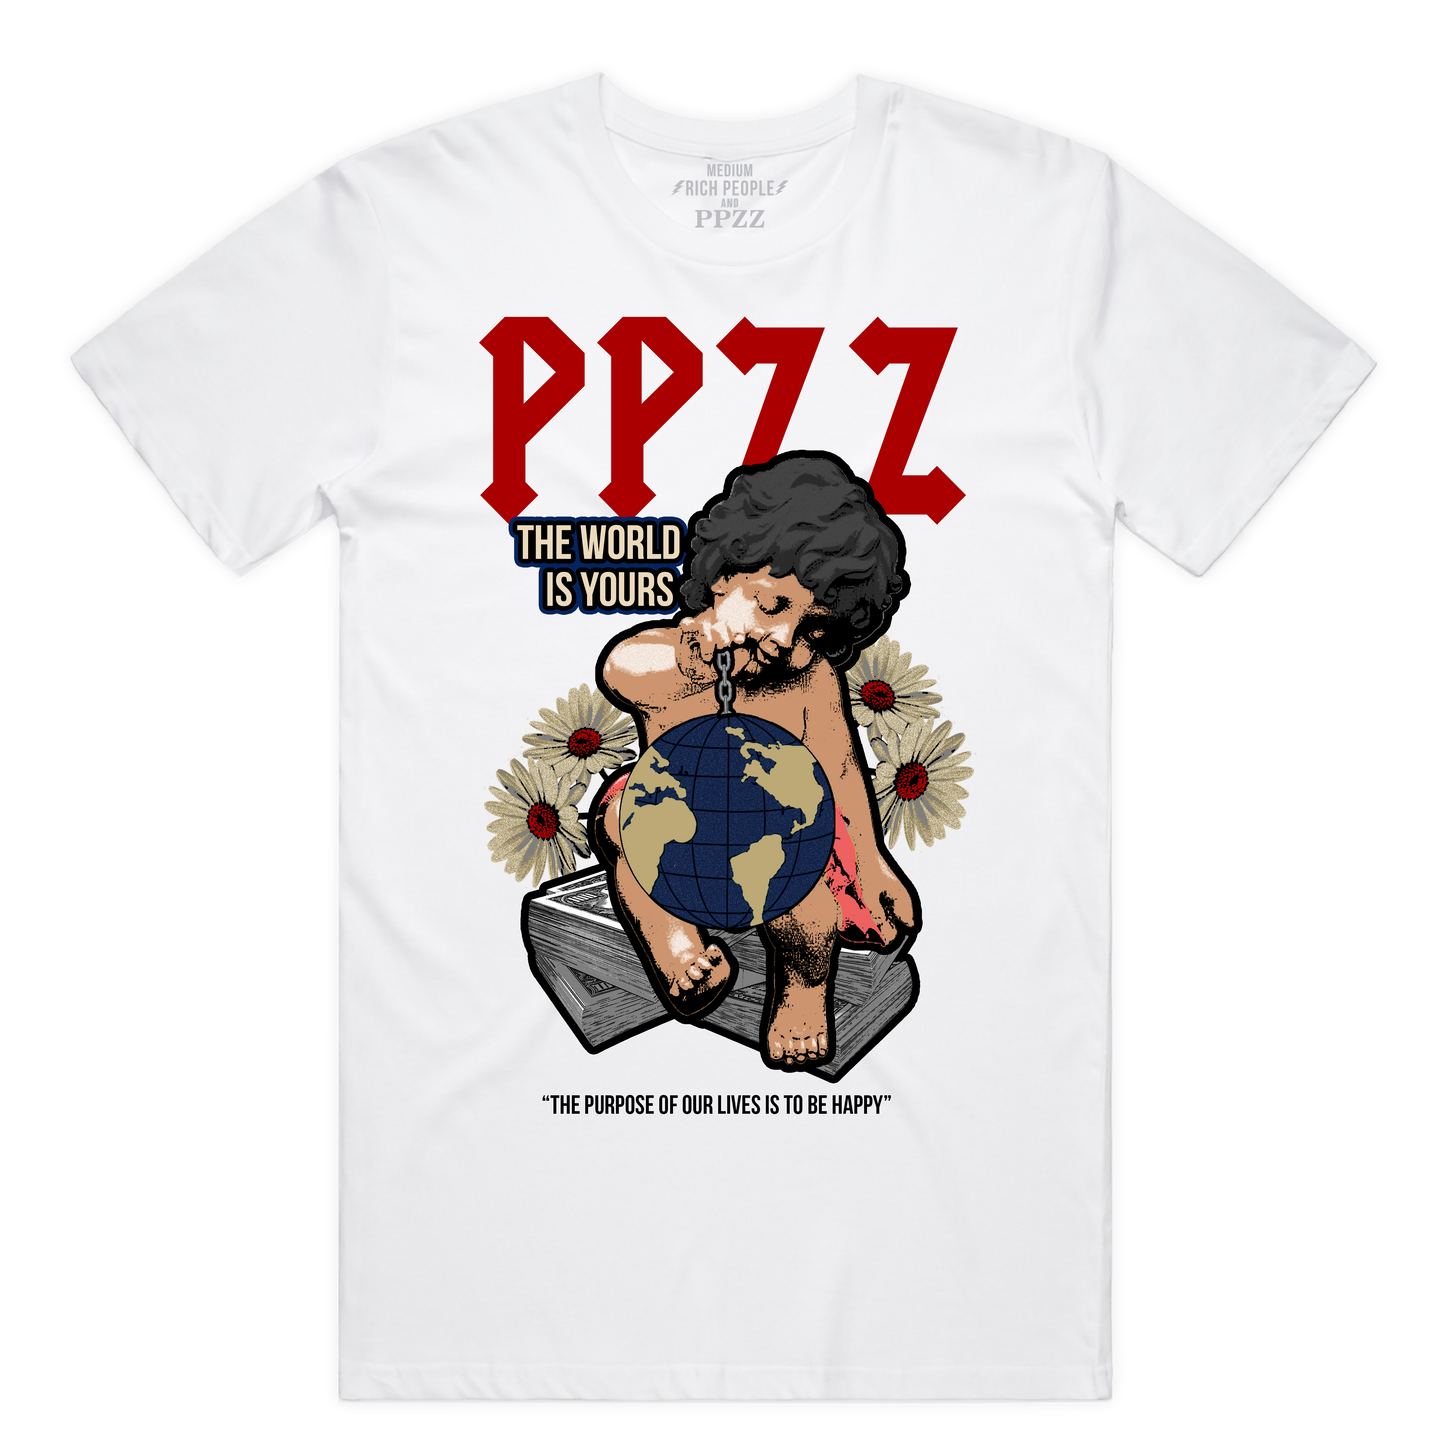 PPZZ x Rich People The World Is Yours Tee (Red/Wte) /D4